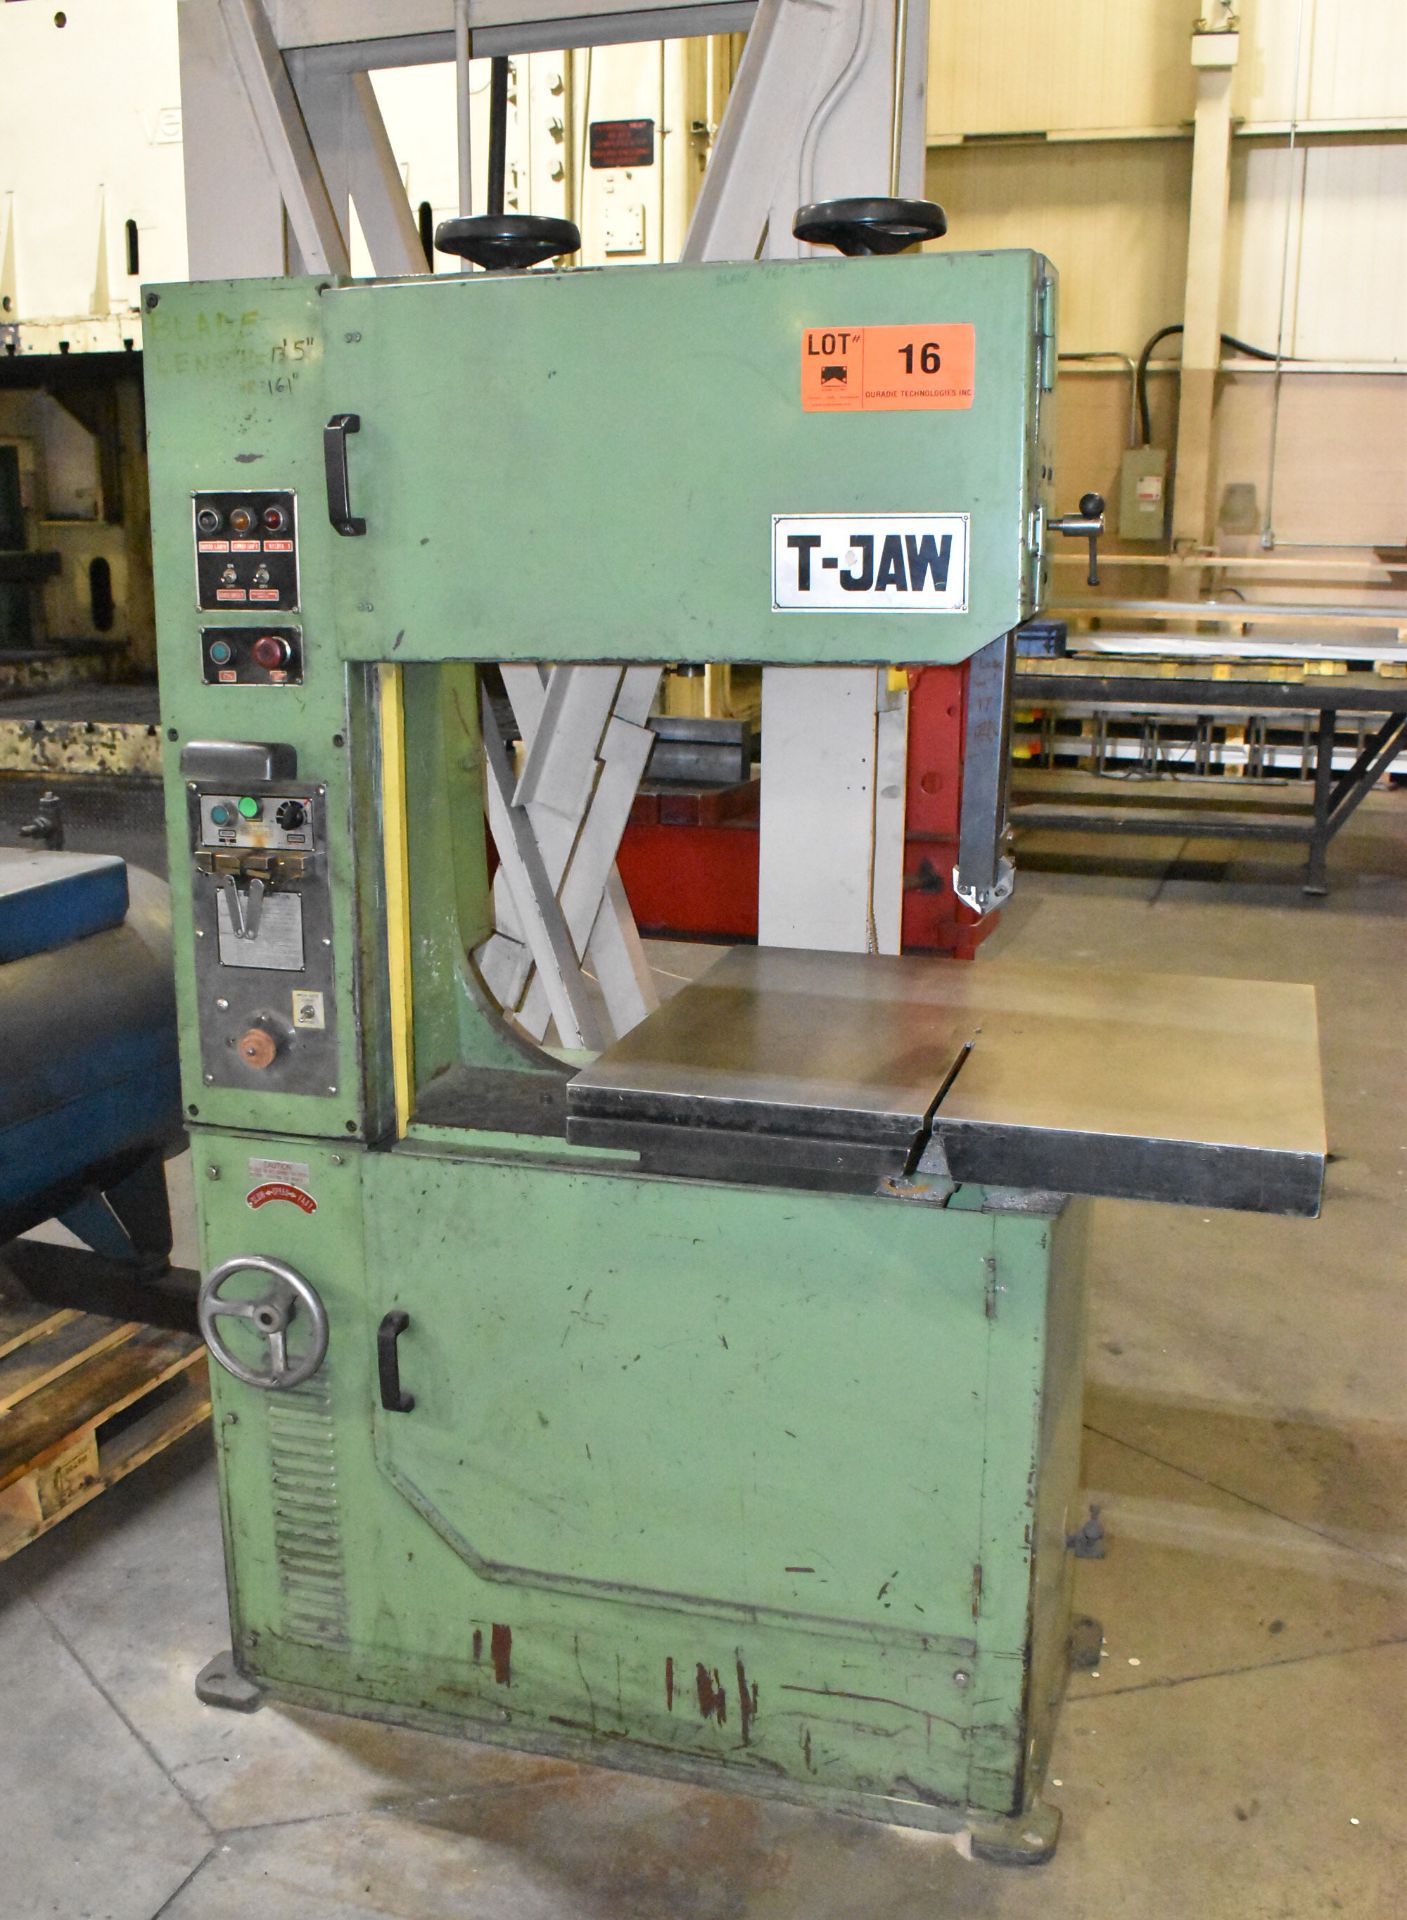 T-JAW 700 VERTICAL BAND SAW WITH 29" X 27" TABLE, 28" THROAT, 16" MAX. WORKPIECE HEIGHT, BLADE